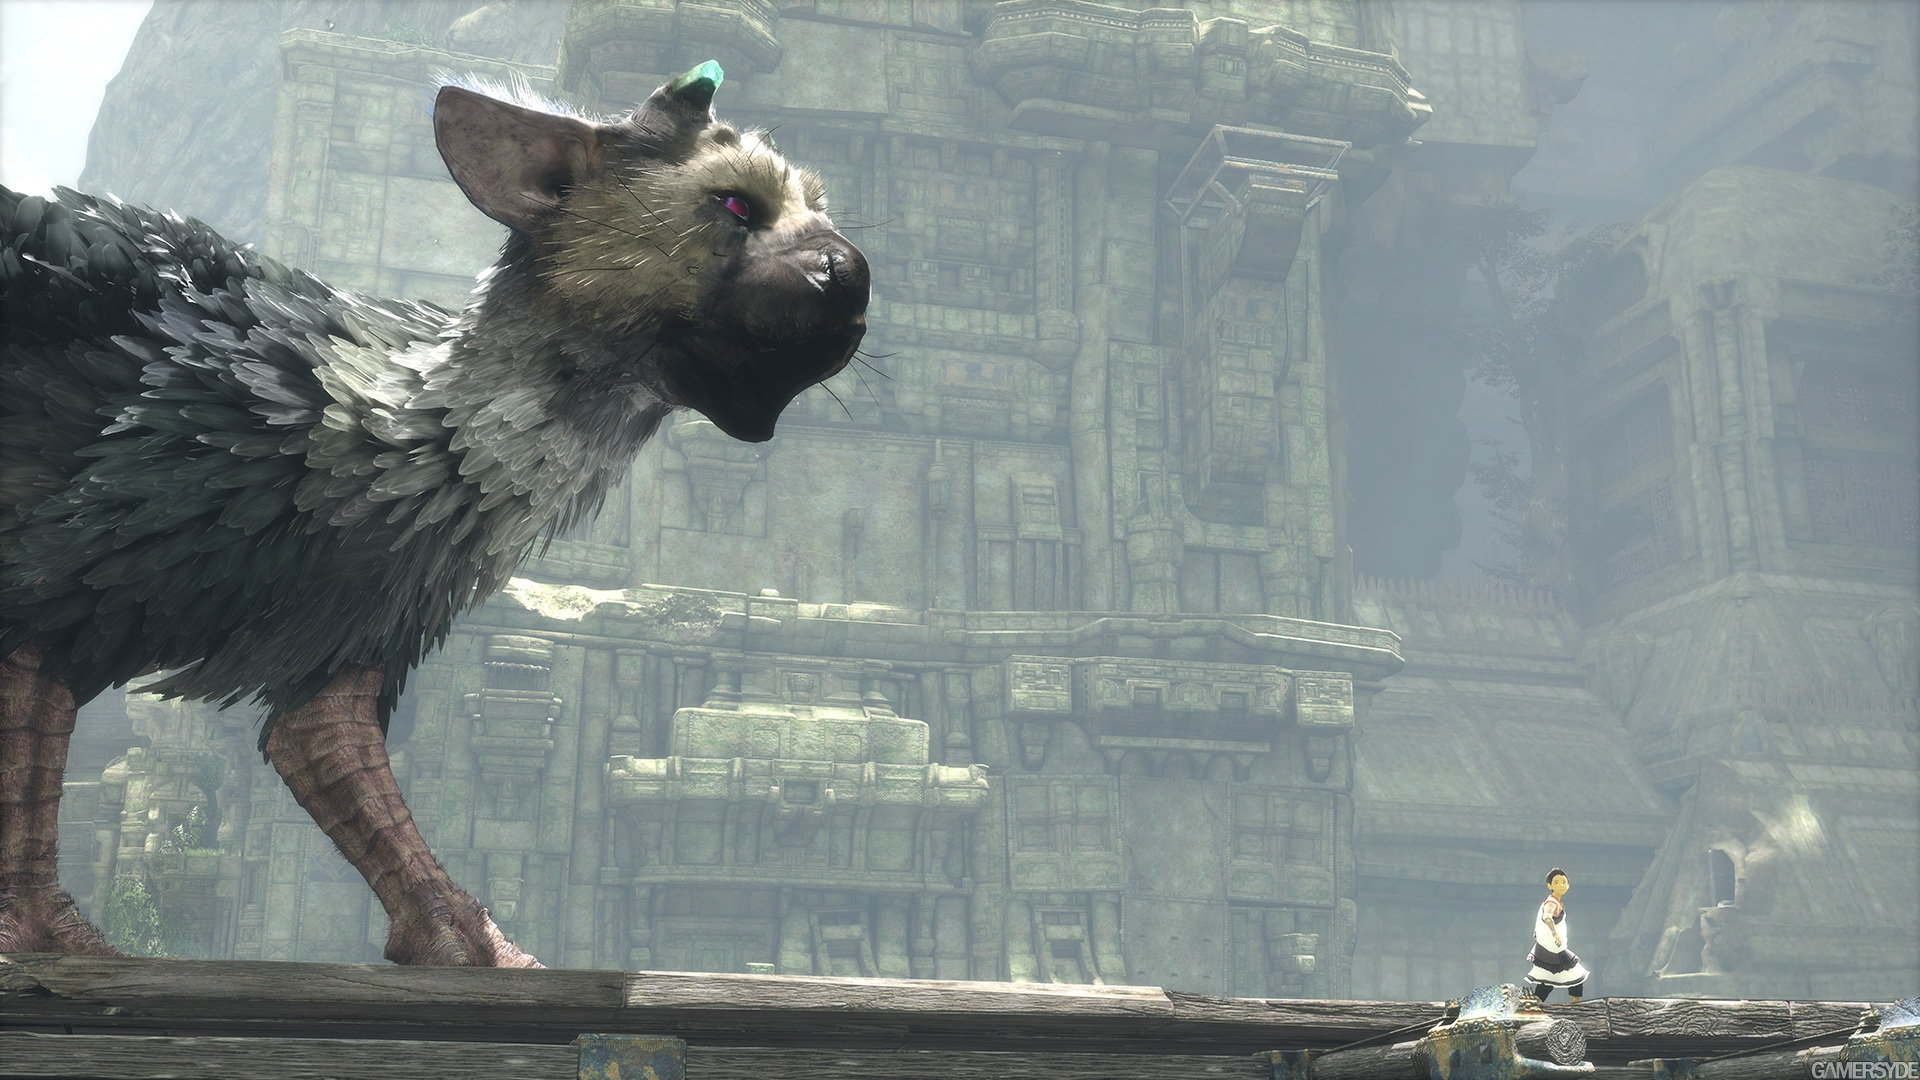 the last guardian gameplay trailer